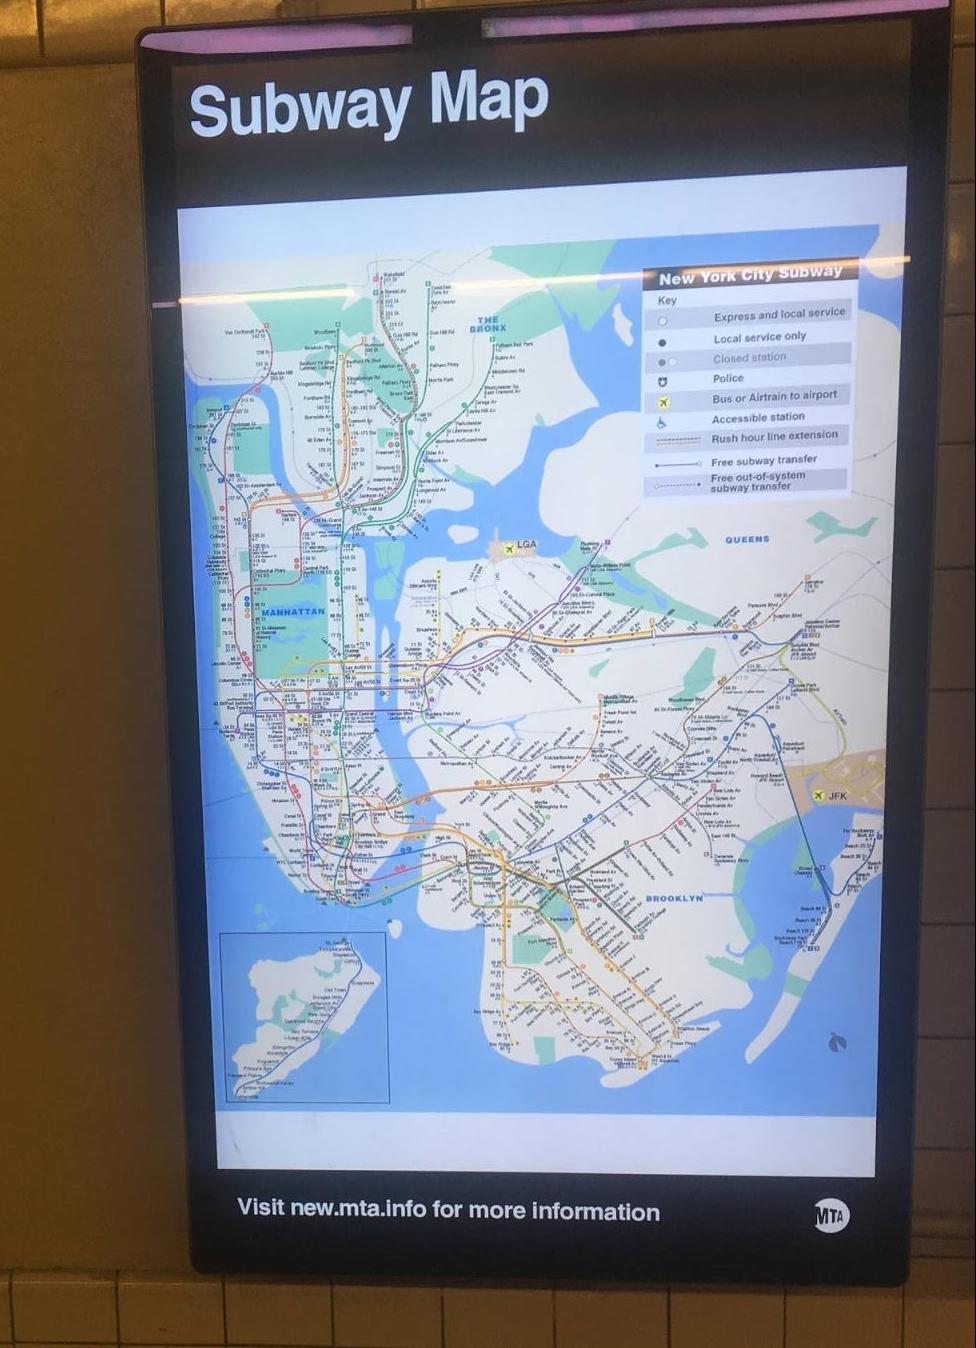 A photograph of a TV in a subway station with the “paper” map displayed.